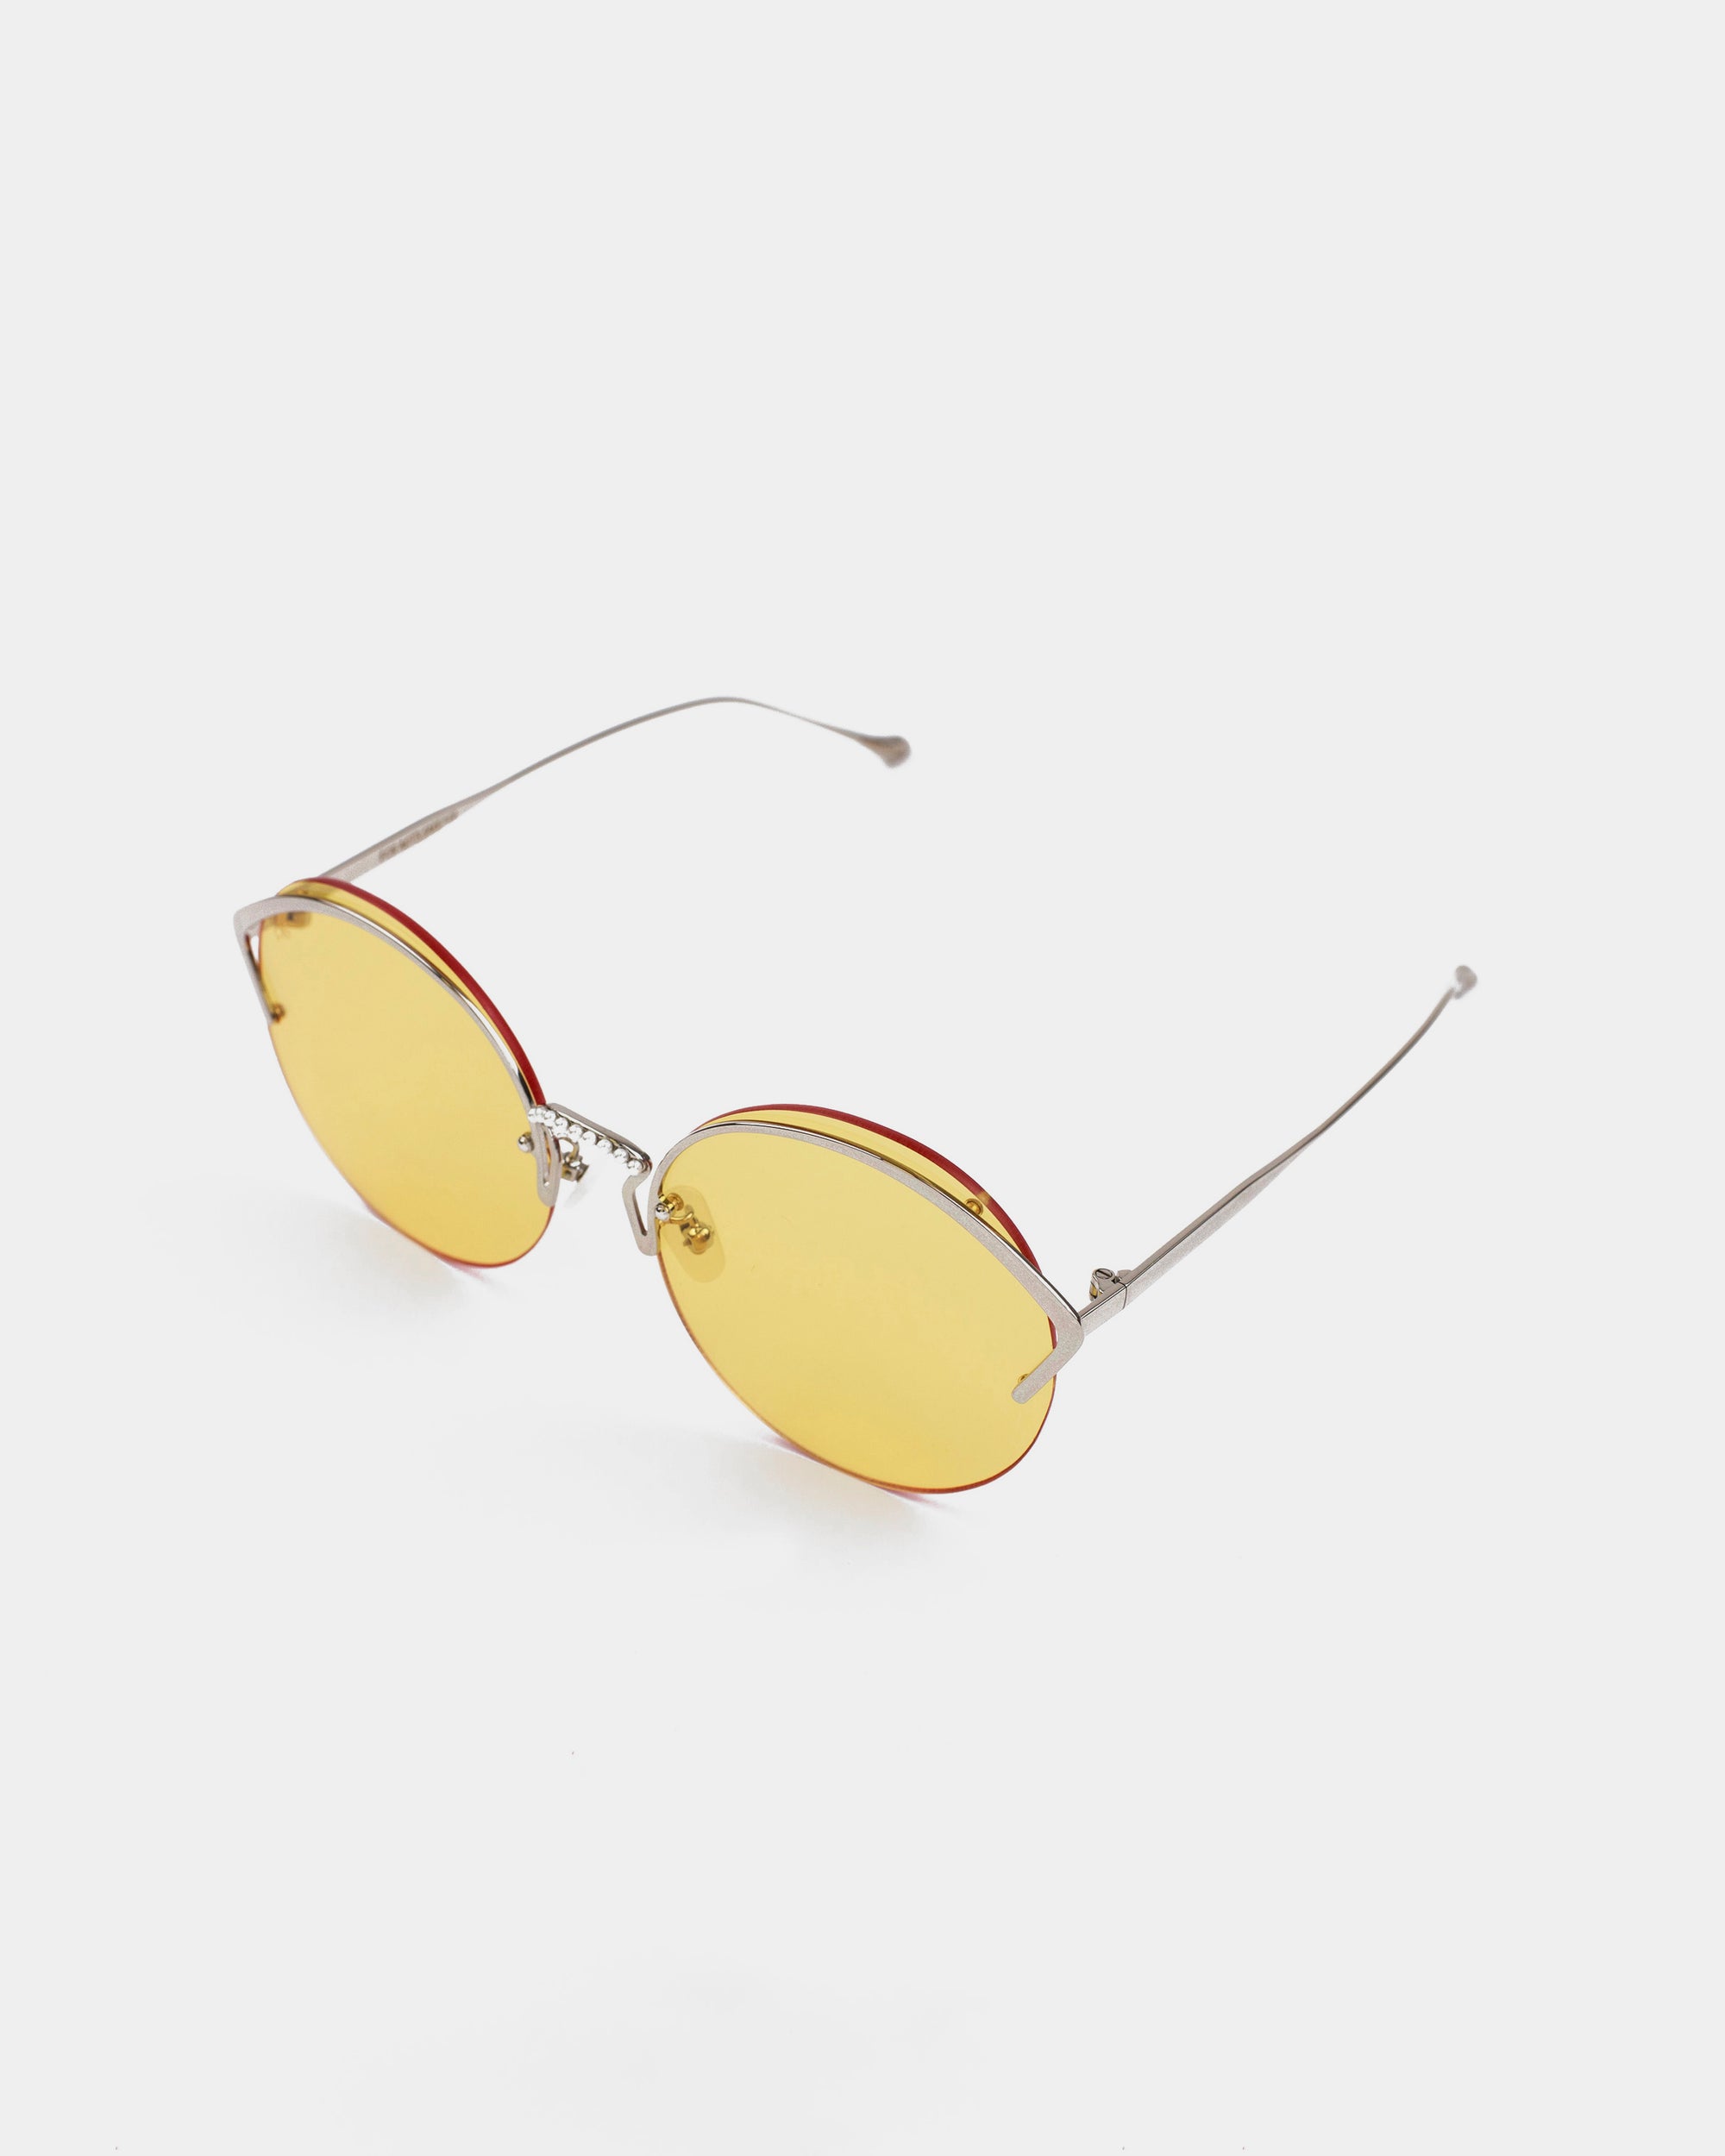 A pair of modern **Margarita** sunglasses by **For Art&#39;s Sake®** with oval-shaped yellow nylon lenses, thin stainless steel frames, and red accents around the lenses. The sunglasses, offering UV protection, are placed on a plain white background, tilted slightly to the left.